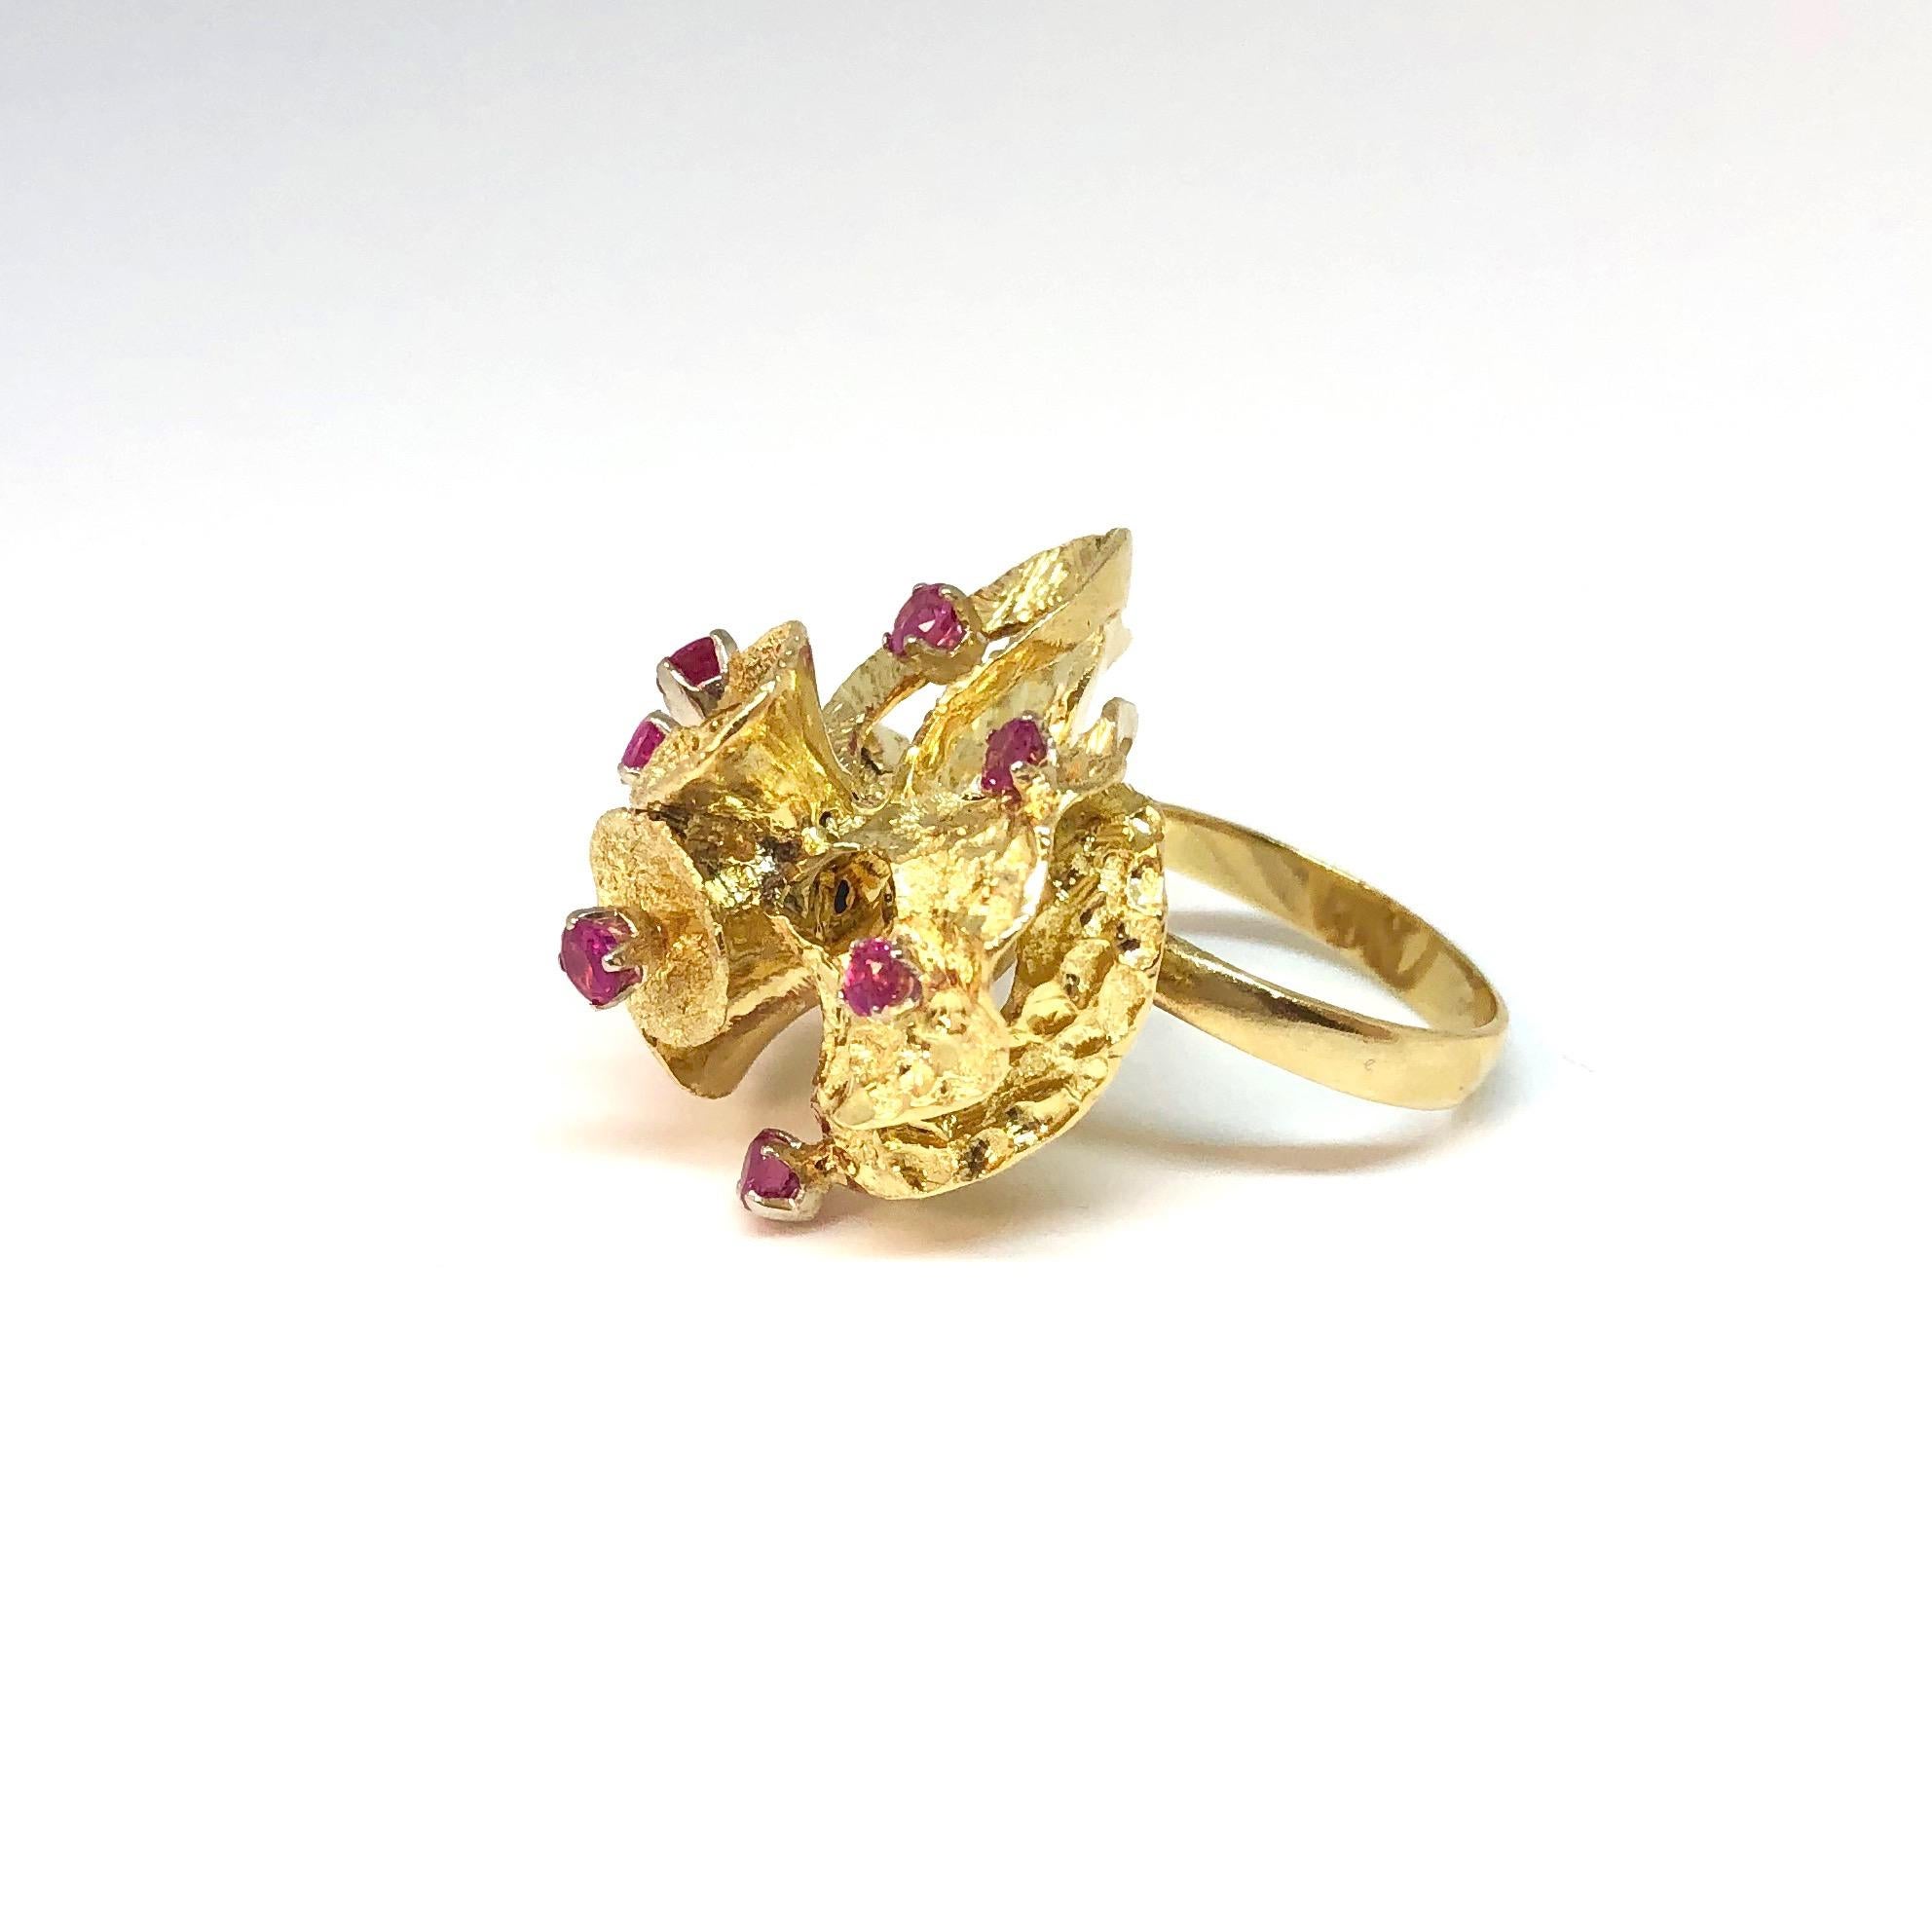 Crafted in 18K yellow gold, the ring features a multi-tiered design with pink sapphire accents.
9 round pink sapphires, approximate total weight: 0.50ct. 
Measurements:
Front: 25mm ( 1